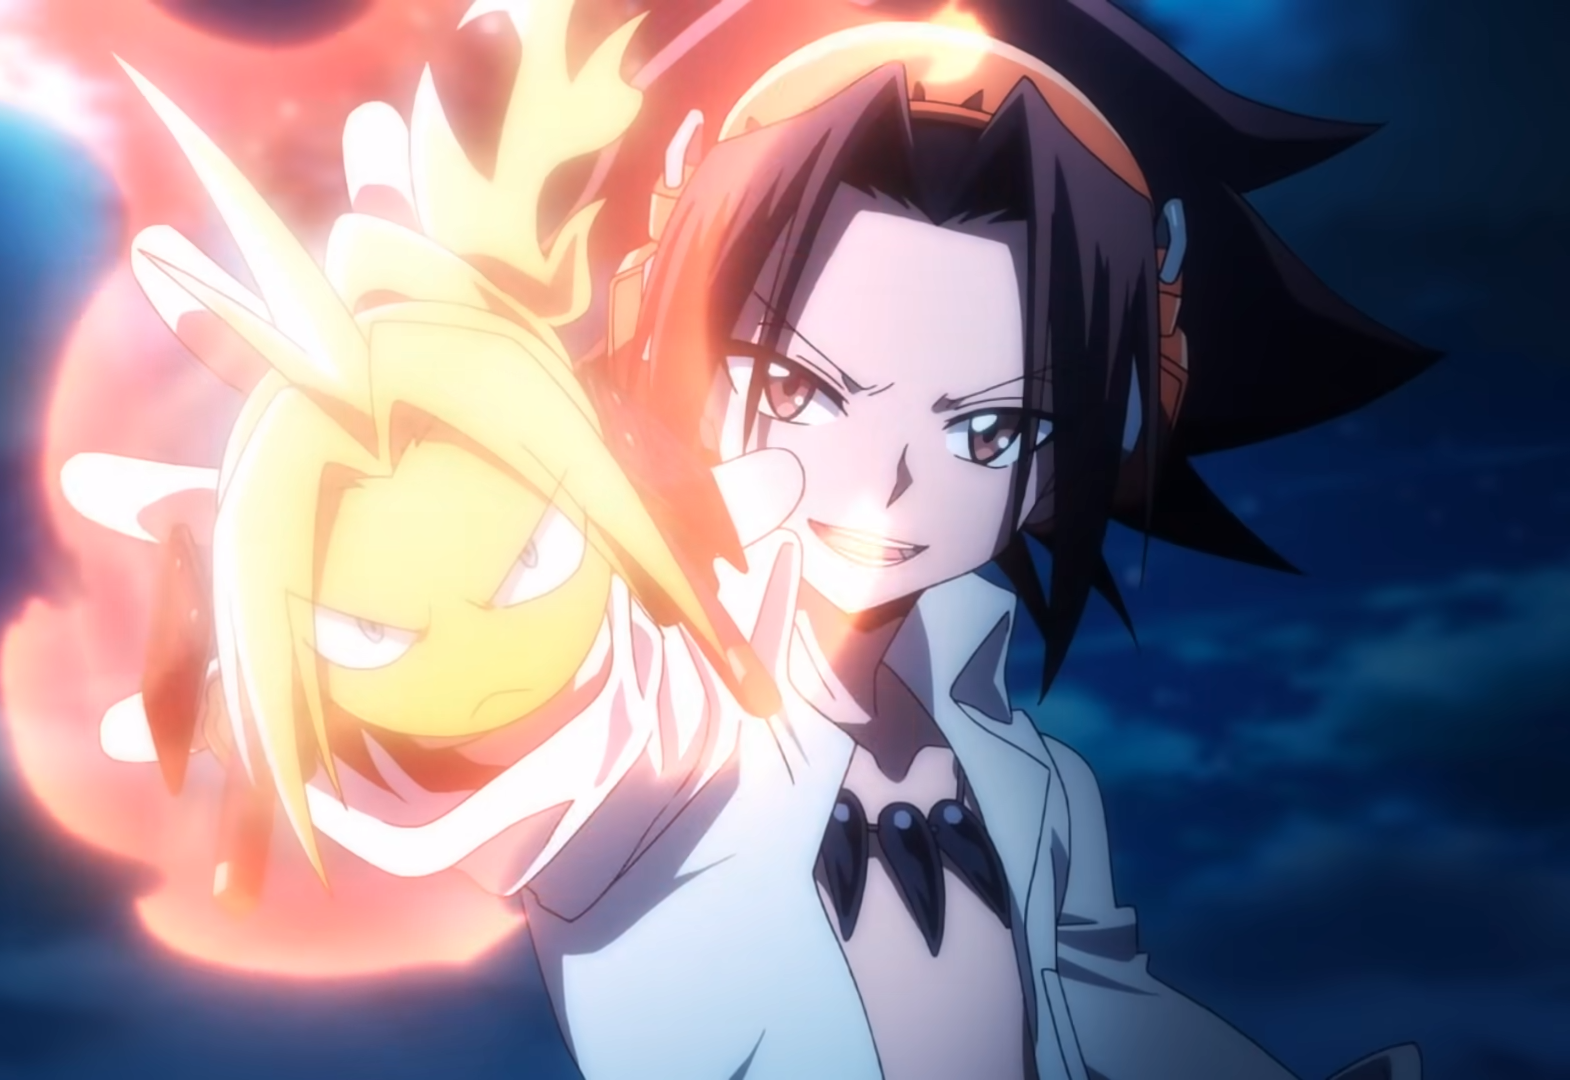 Shaman King Episode 18, 19 Delayed: Check New Release Date - The Teal Mango